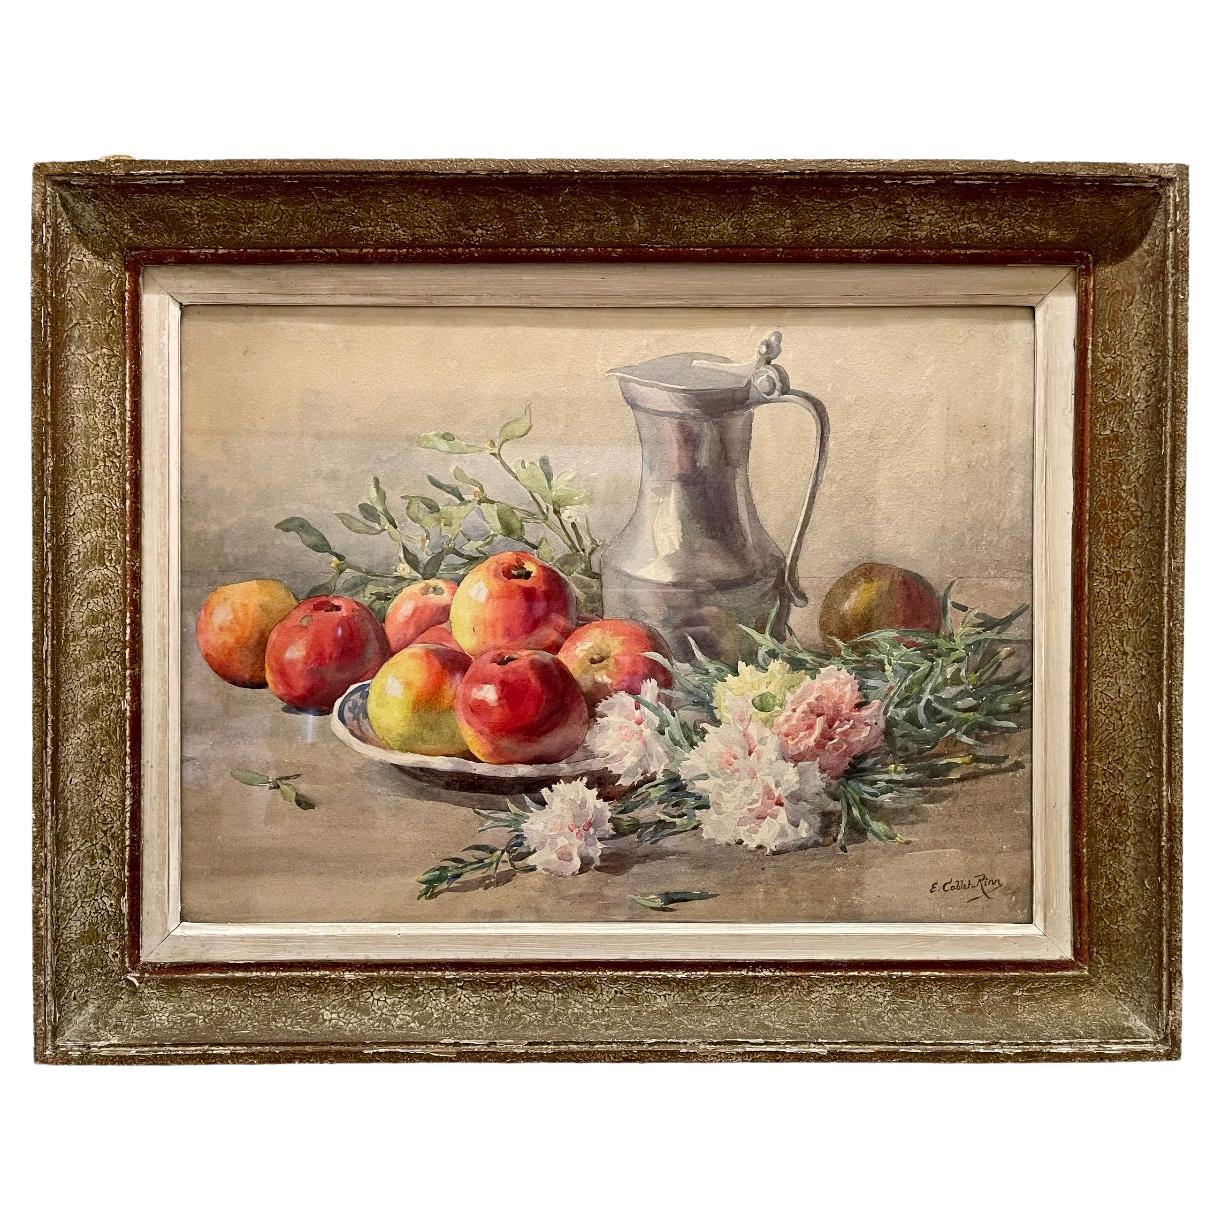 E. CABLET RINN - Still Life, Apples And Carnations  For Sale